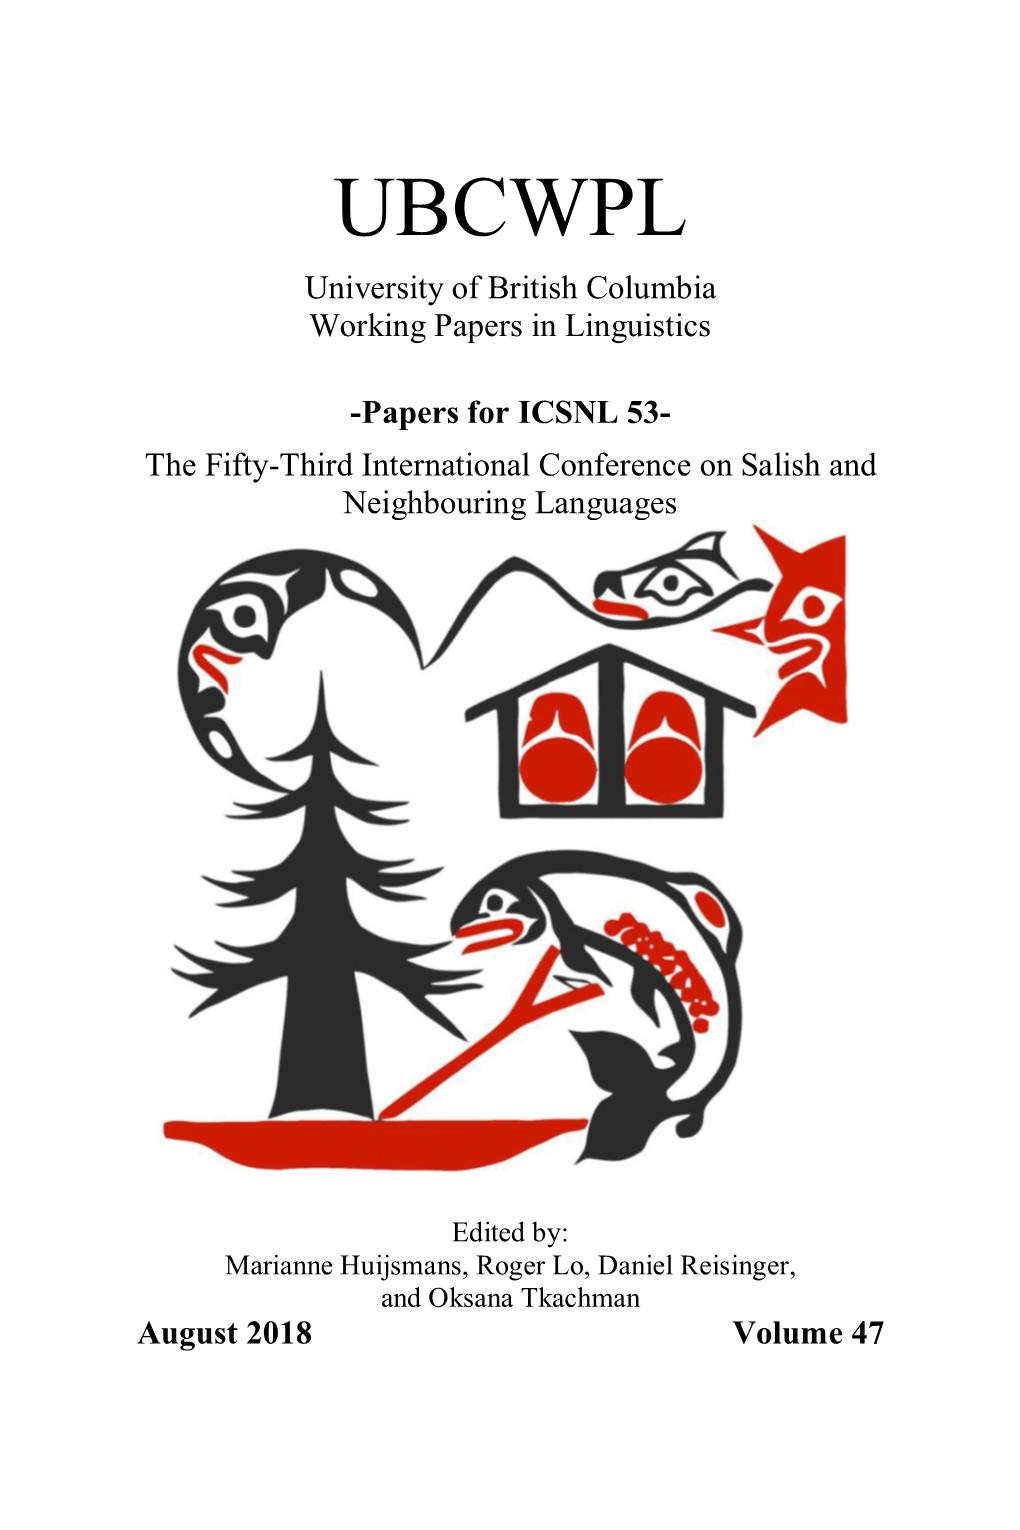 UBCWPL University of British Columbia Working Papers in Linguistics